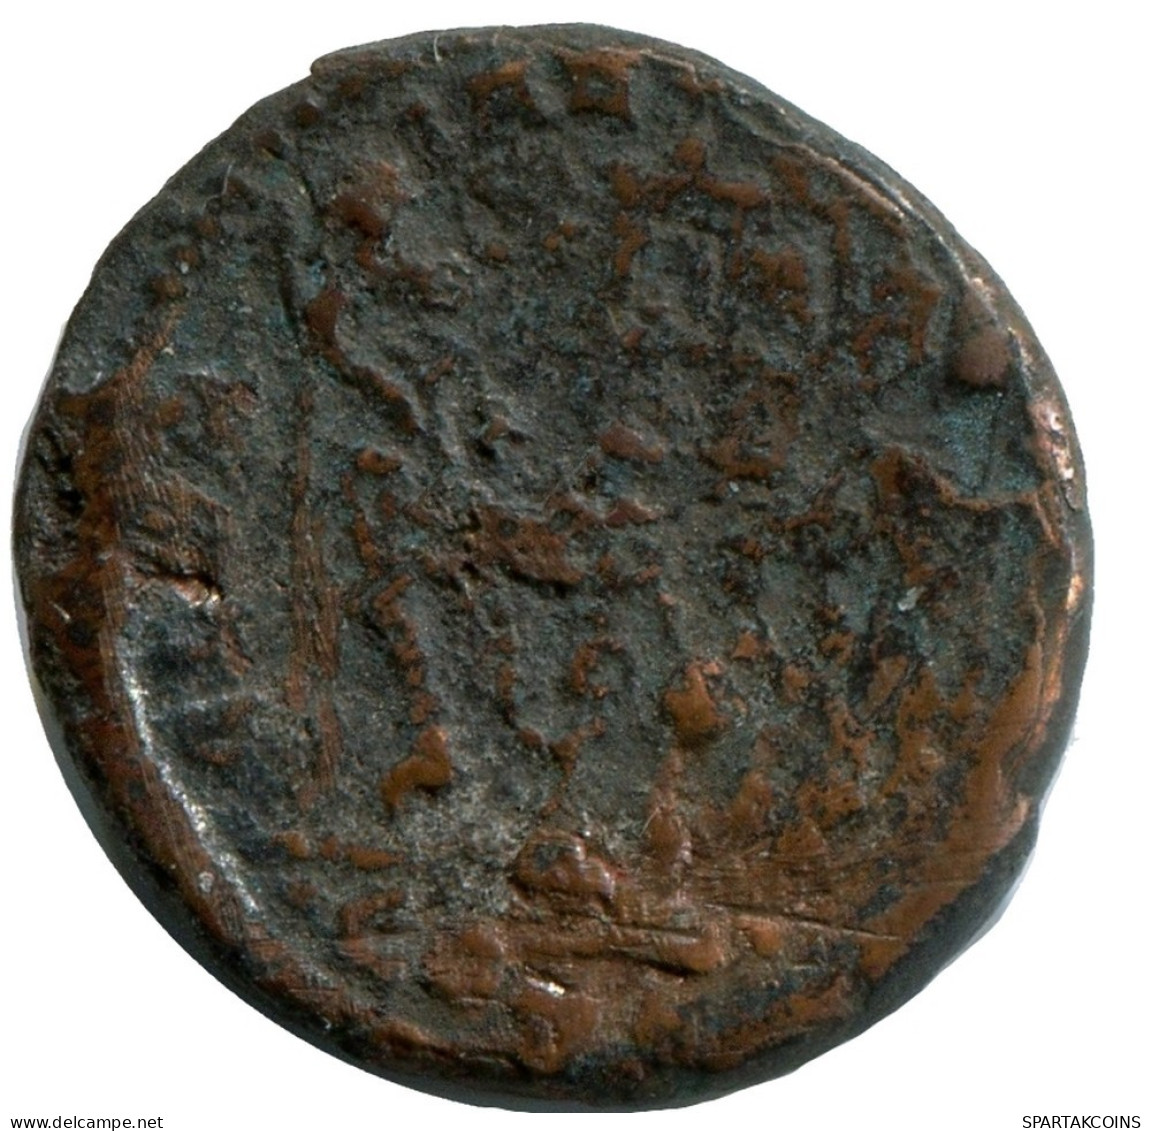 CONSTANTINE I MINTED IN CONSTANTINOPLE FOUND IN IHNASYAH HOARD #ANC10733.14.F.A - L'Empire Chrétien (307 à 363)